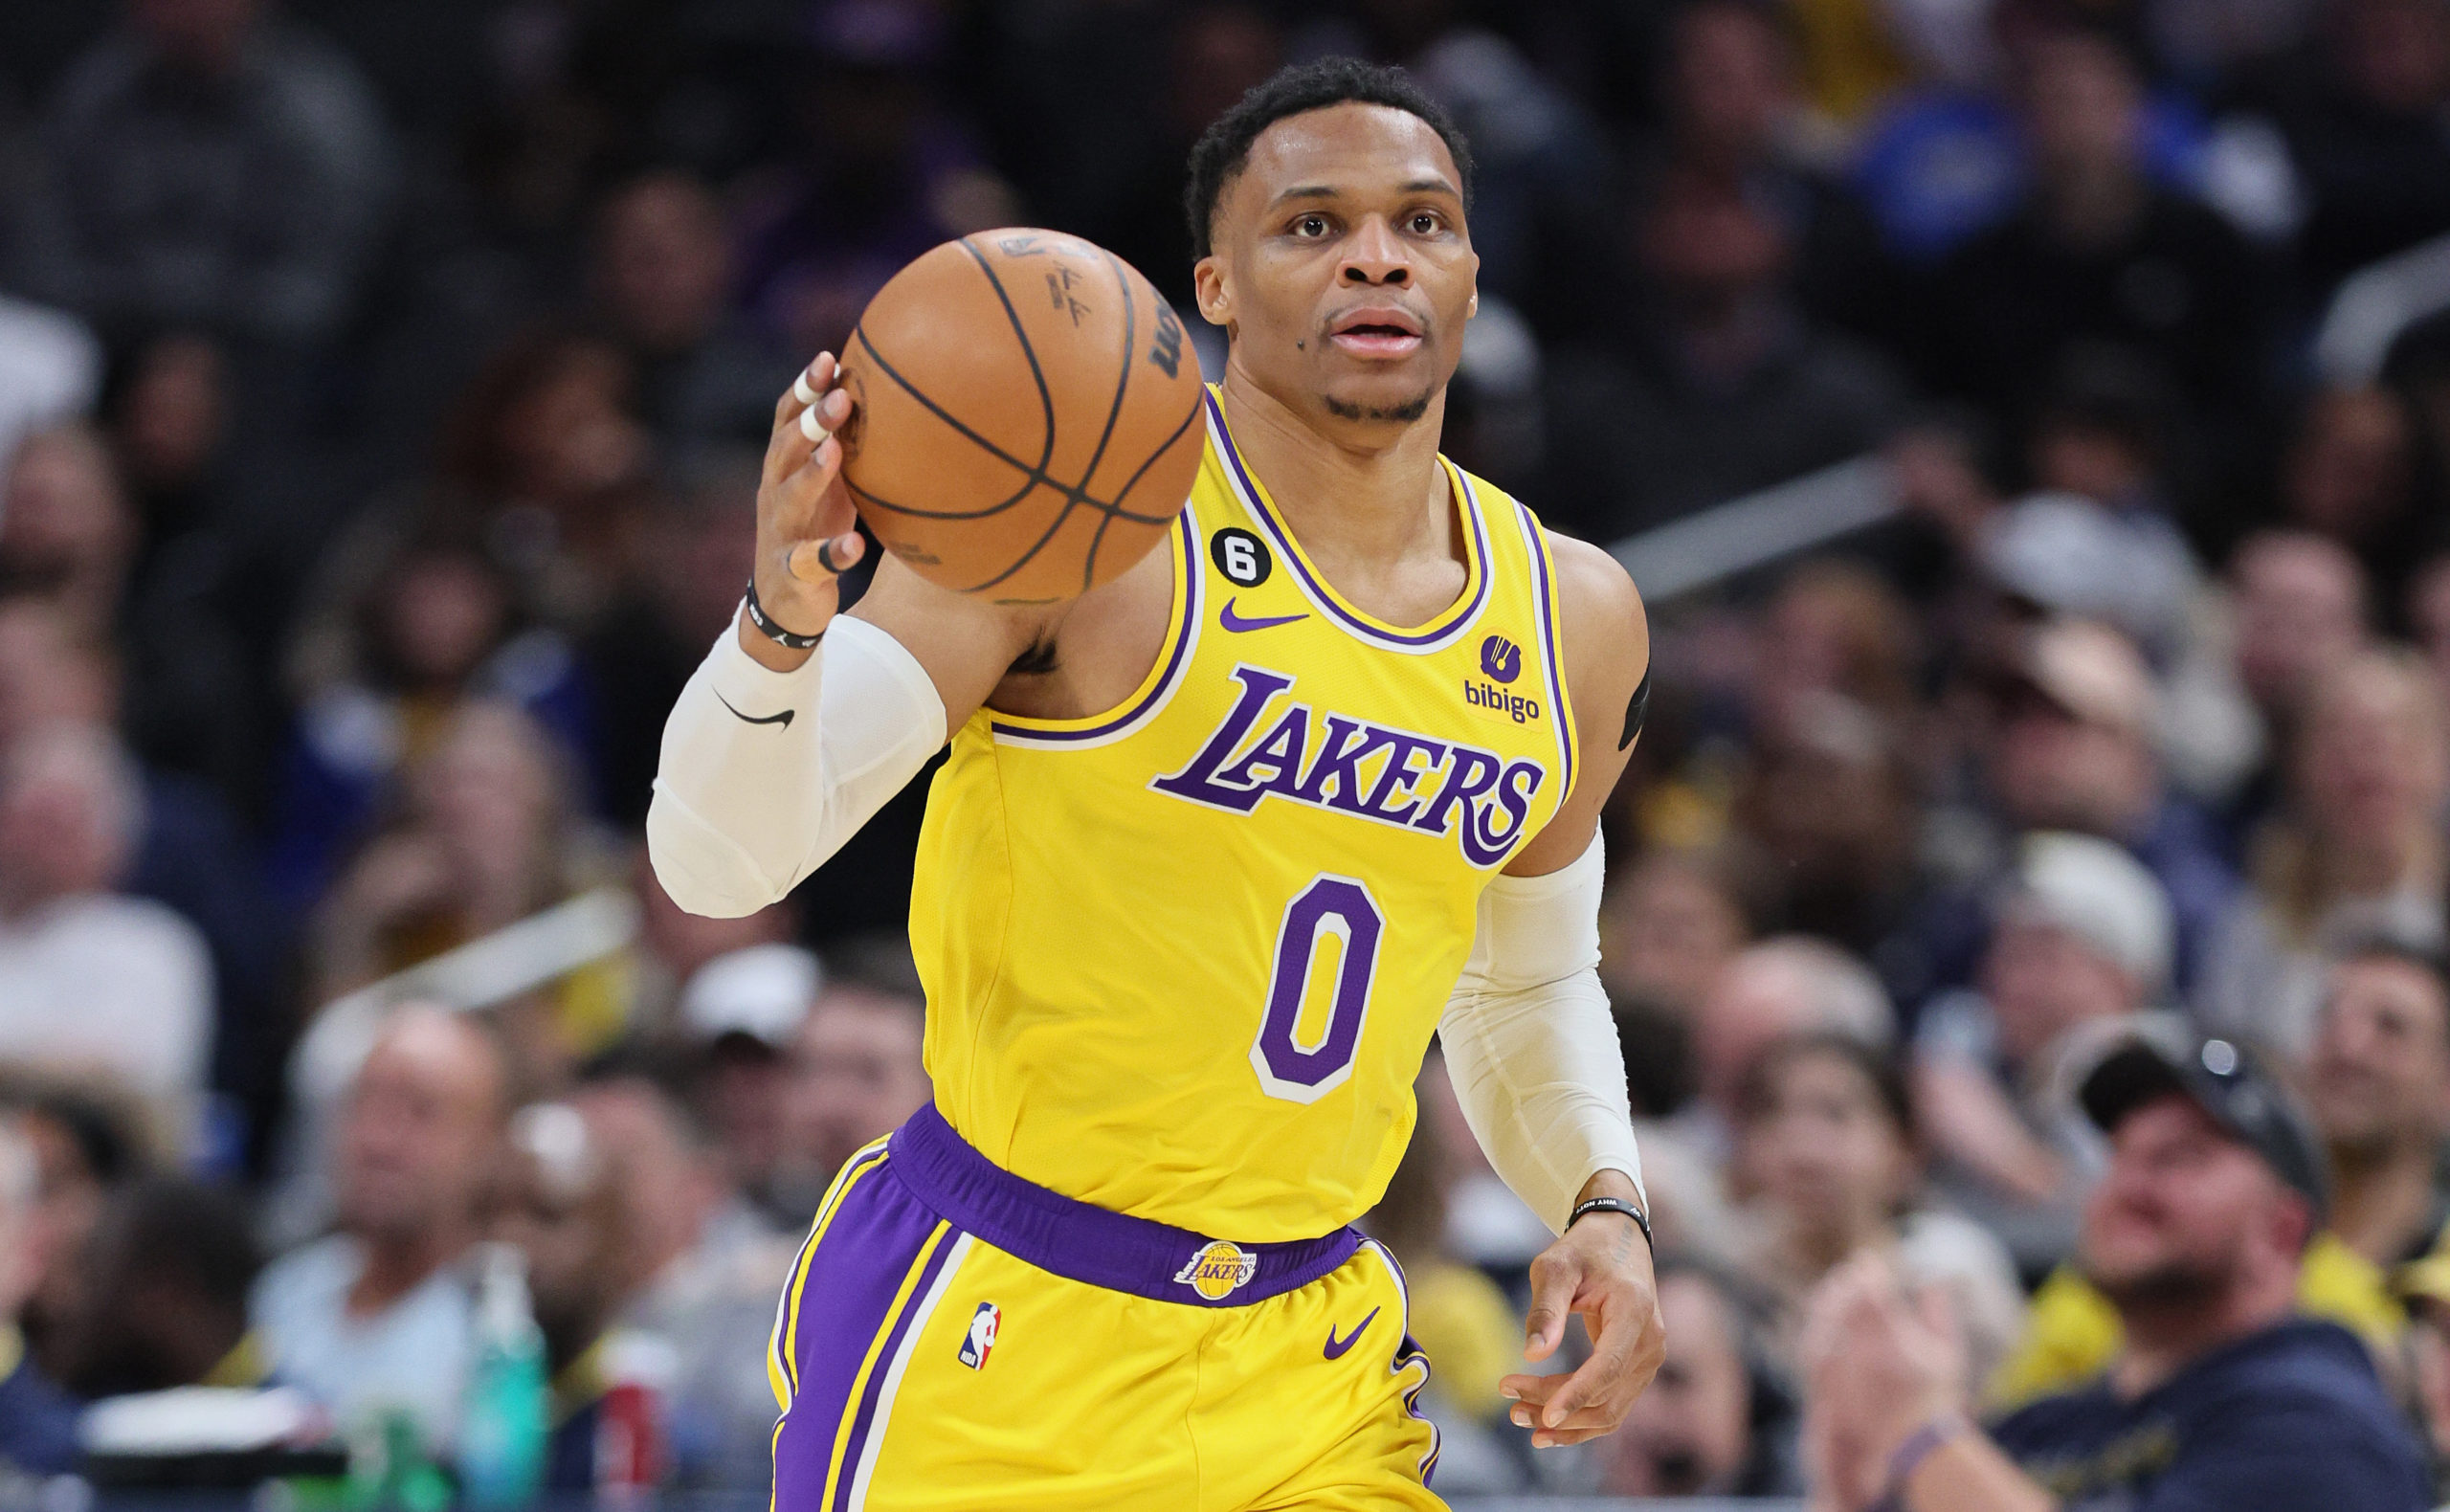 INDIANAPOLIS, INDIANA - FEBRUARY 02: Russell Westbrook #0 of the Los Angeles Lakers during the game against the Indiana Pacers at Gainbridge Fieldhouse on February 02, 2023 in Indianapolis, Indiana. Andy Lyons/Getty Images